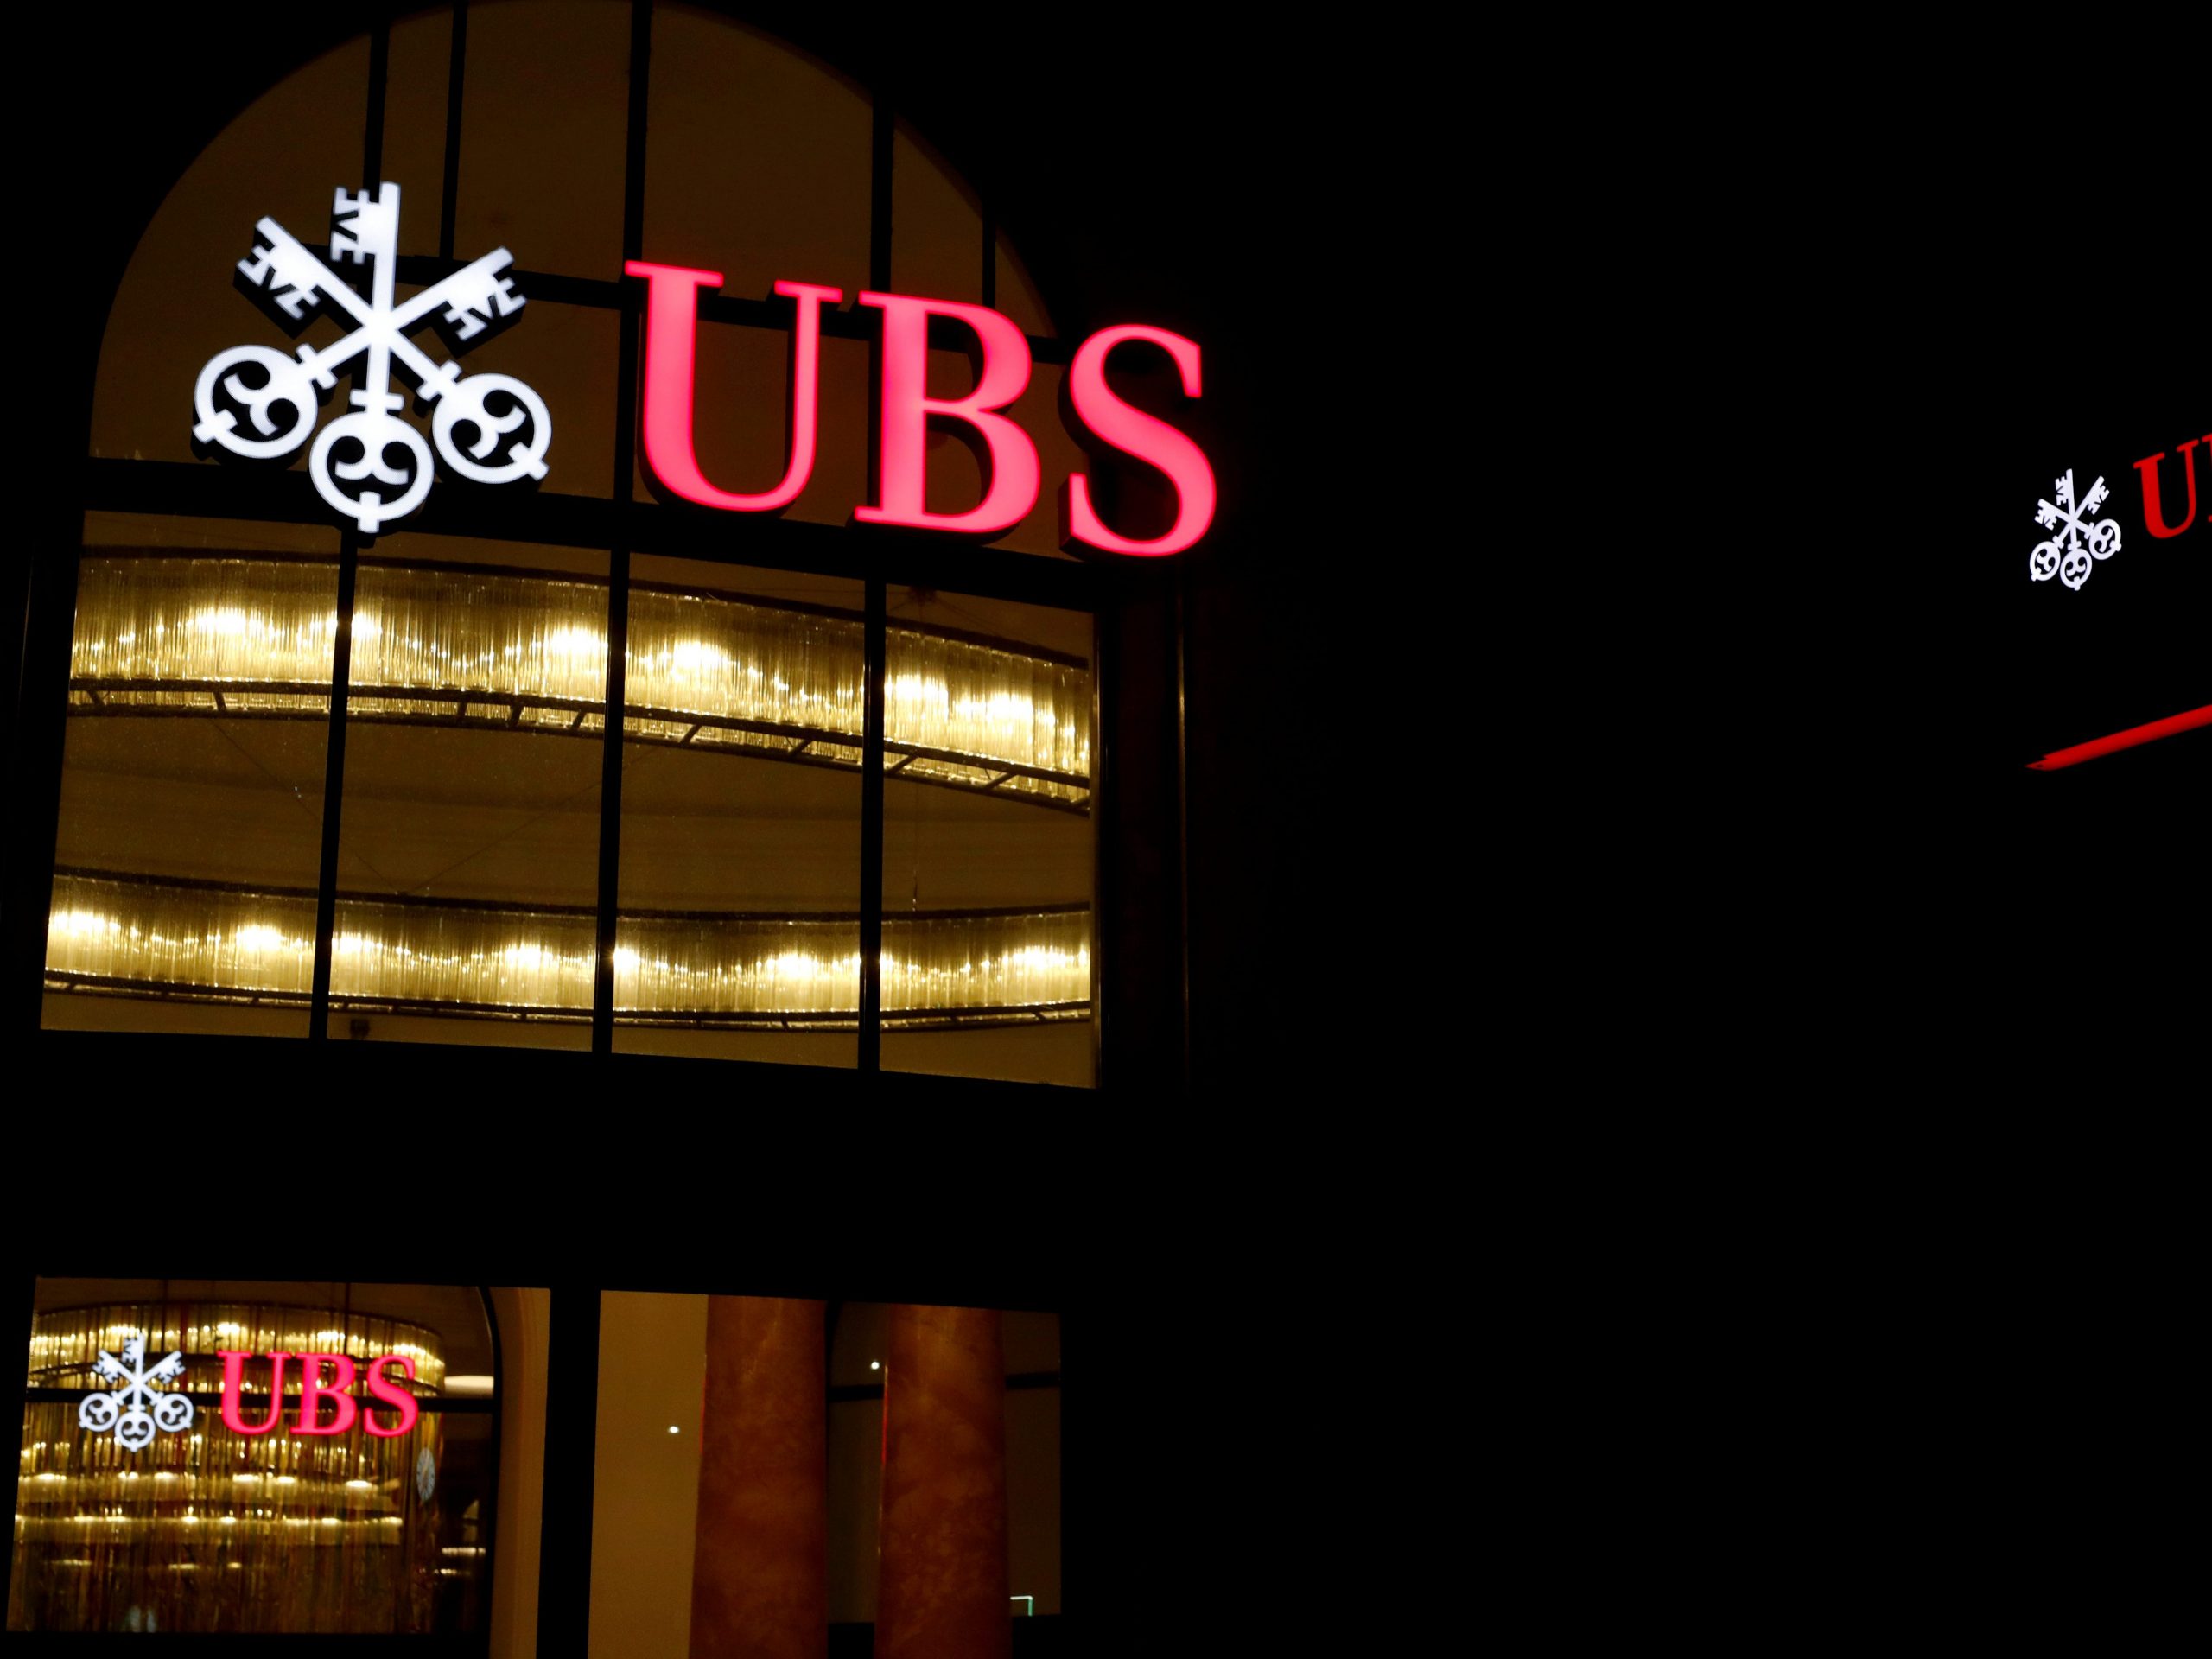 FILE PHOTO: The logo of Swiss bank UBS is seen at a branch office in Basel, Switzerland March 2, 2020. REUTERS/Arnd Wiegmann